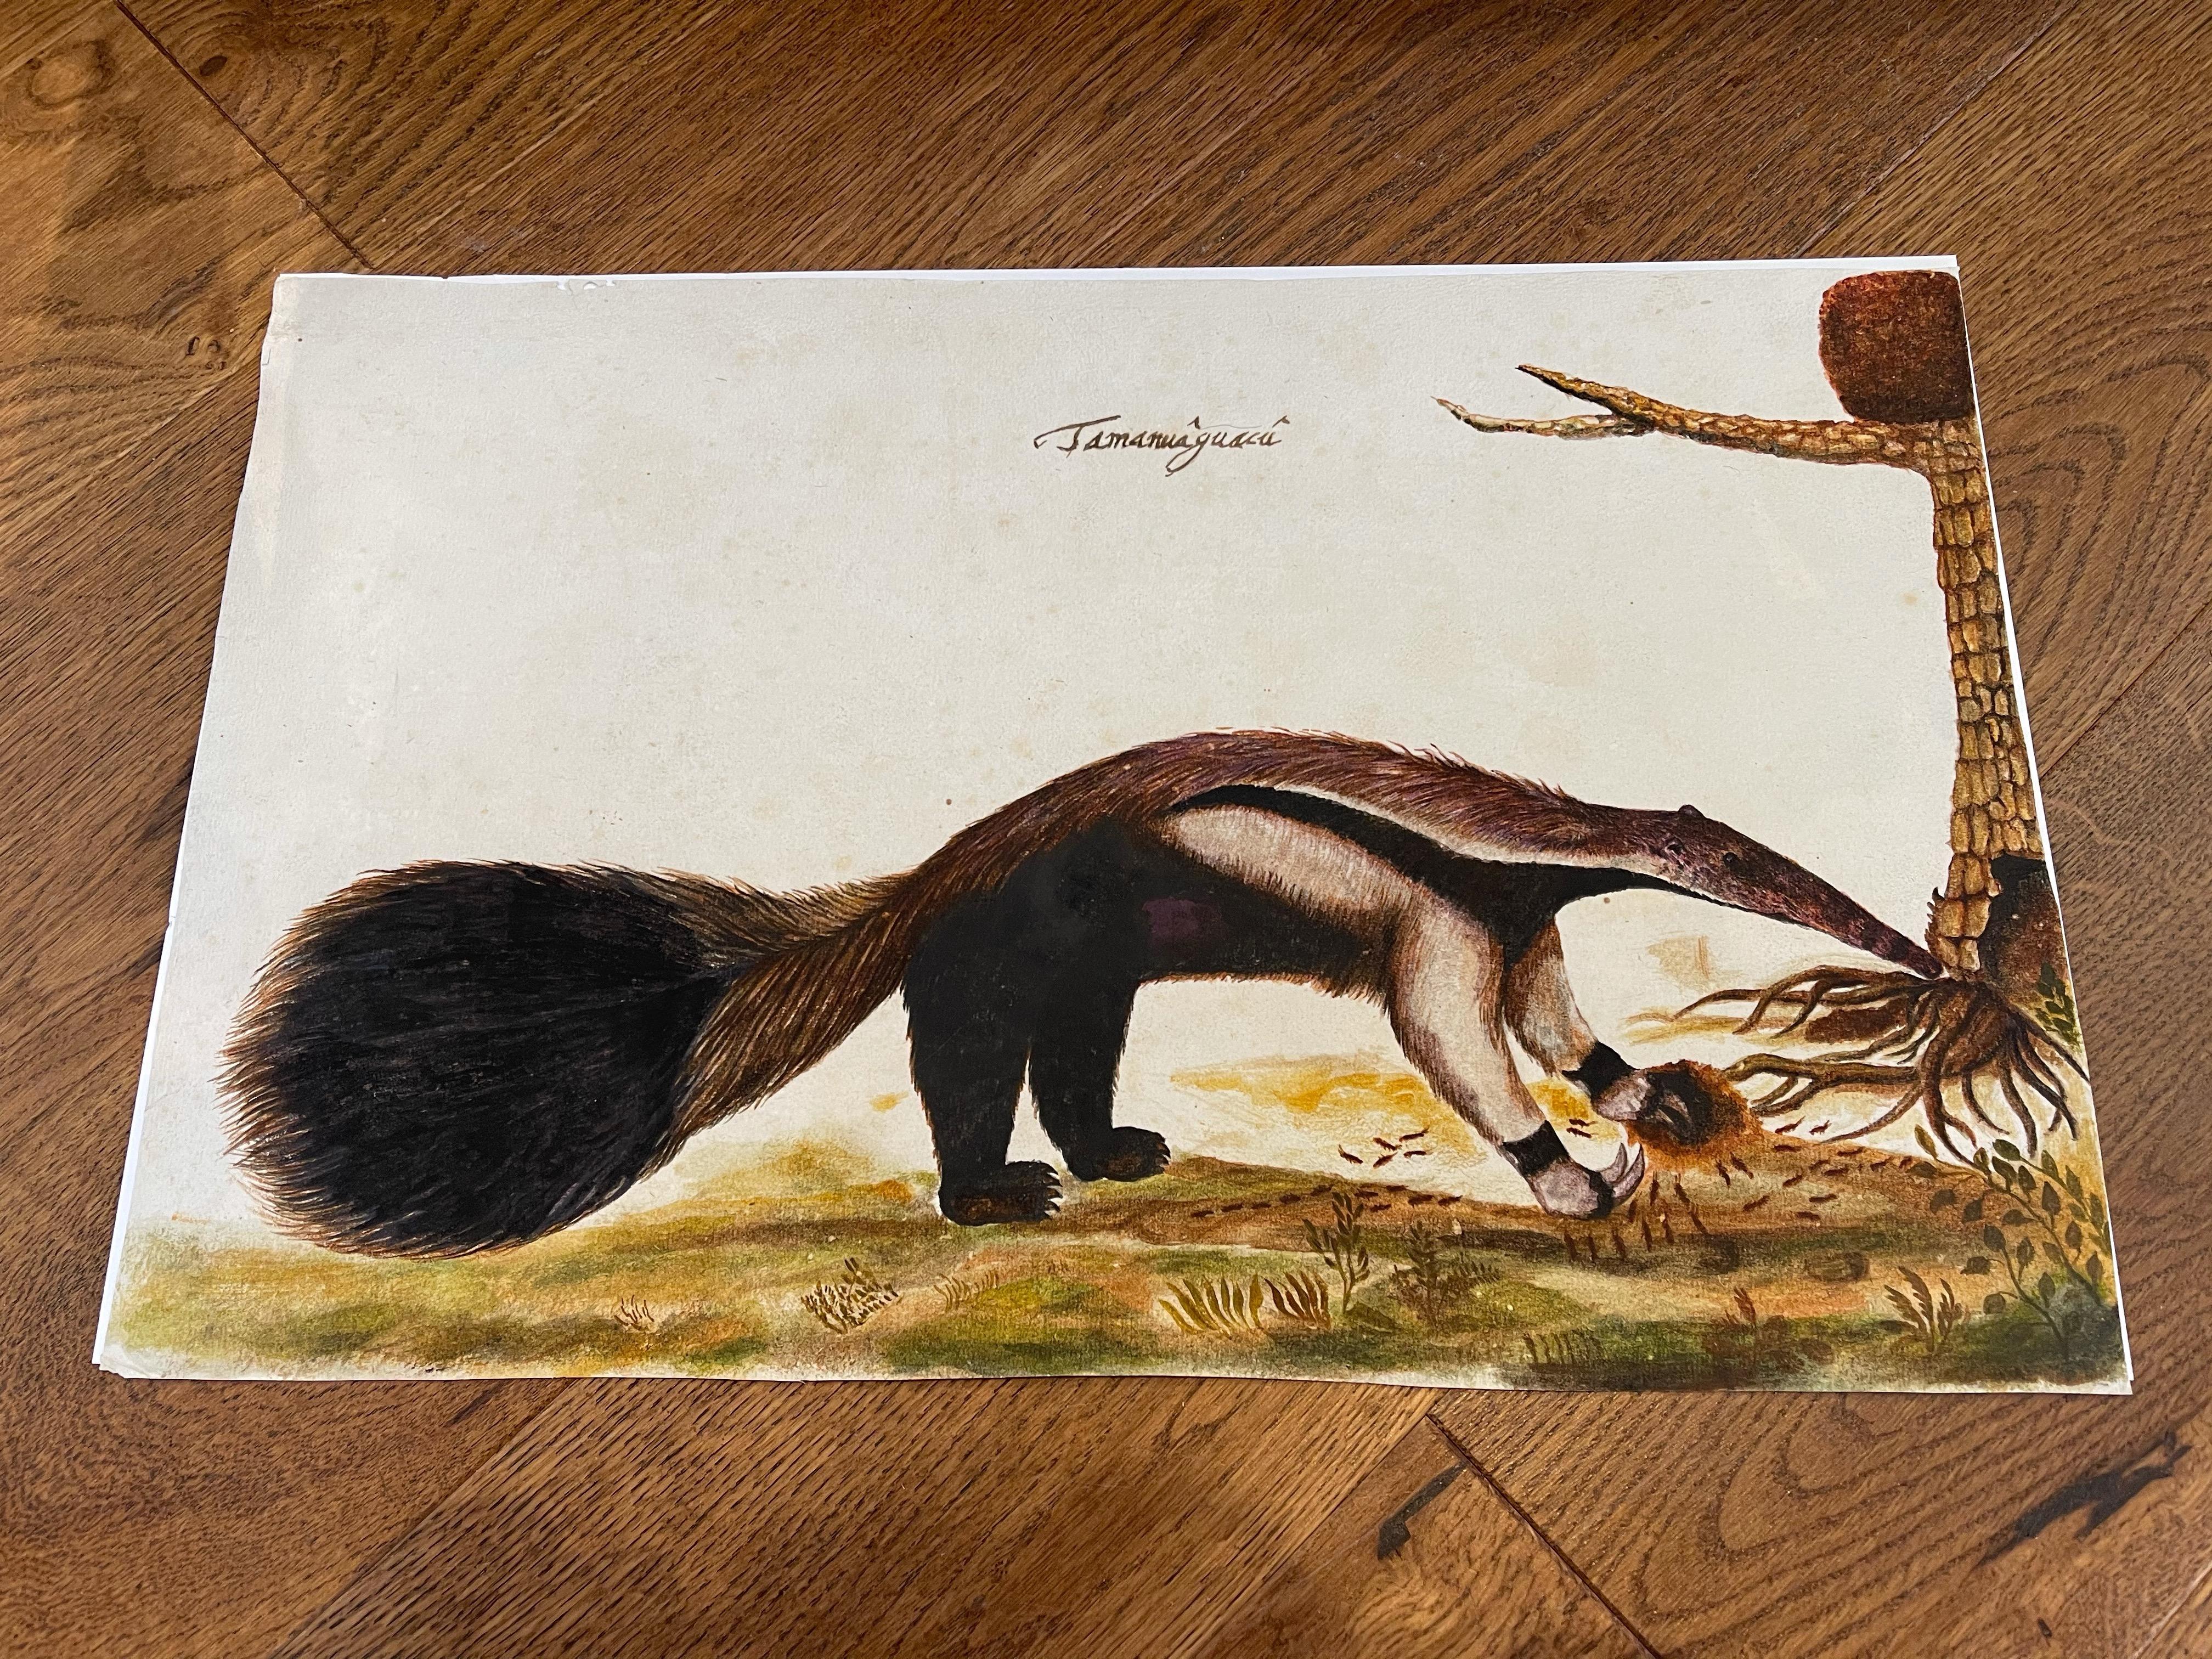 Animal painting of a 'Tamanuâguacû (Ant-eater)' late 17th/18th century, Brazil - Art by Zacharias Wagener